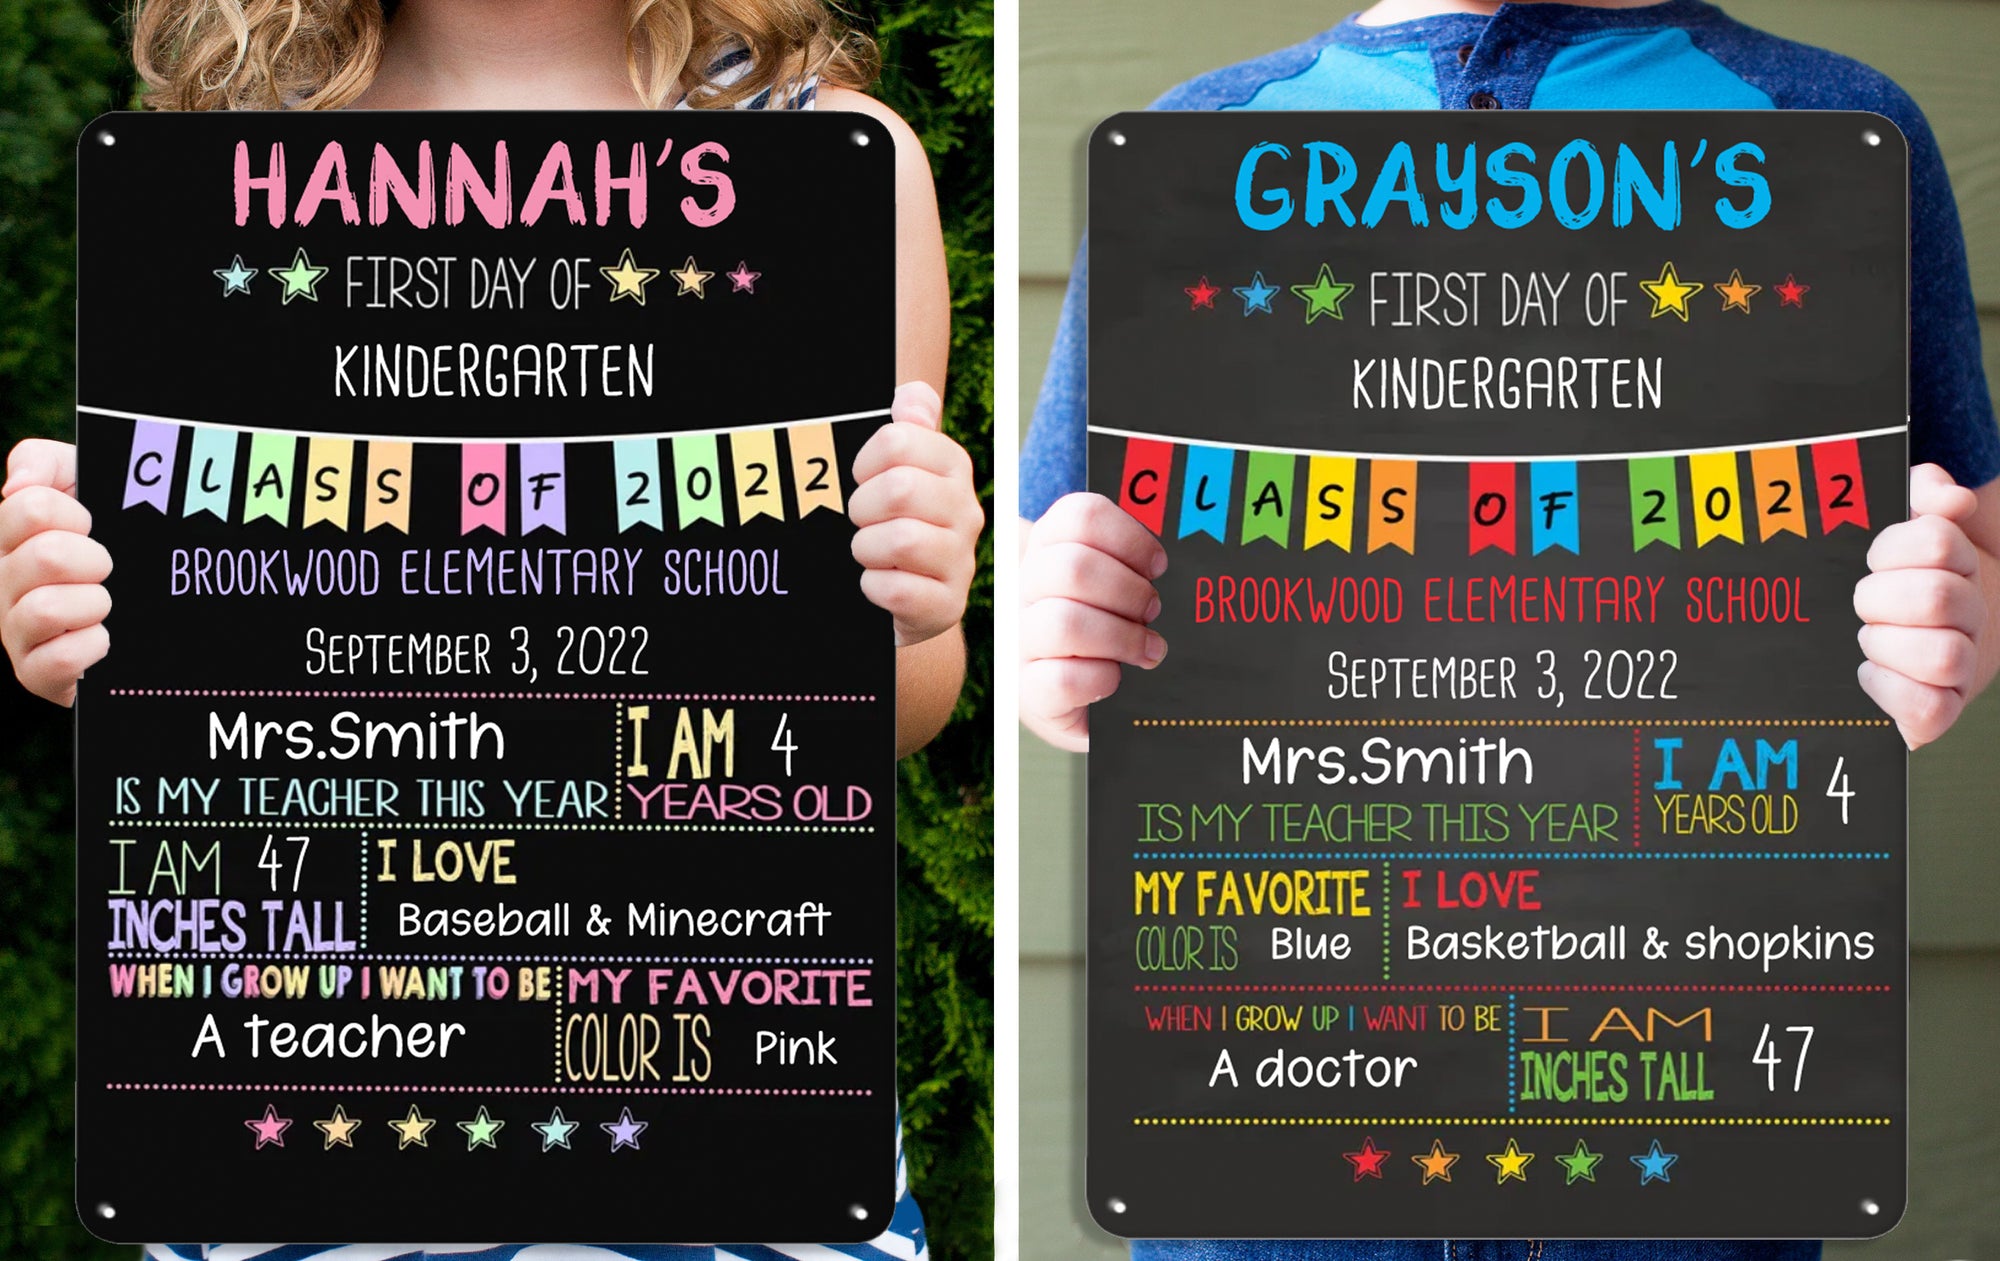 First Day of School Sign-Back To School-Kindergarten Sign-Personalized Metal Signs